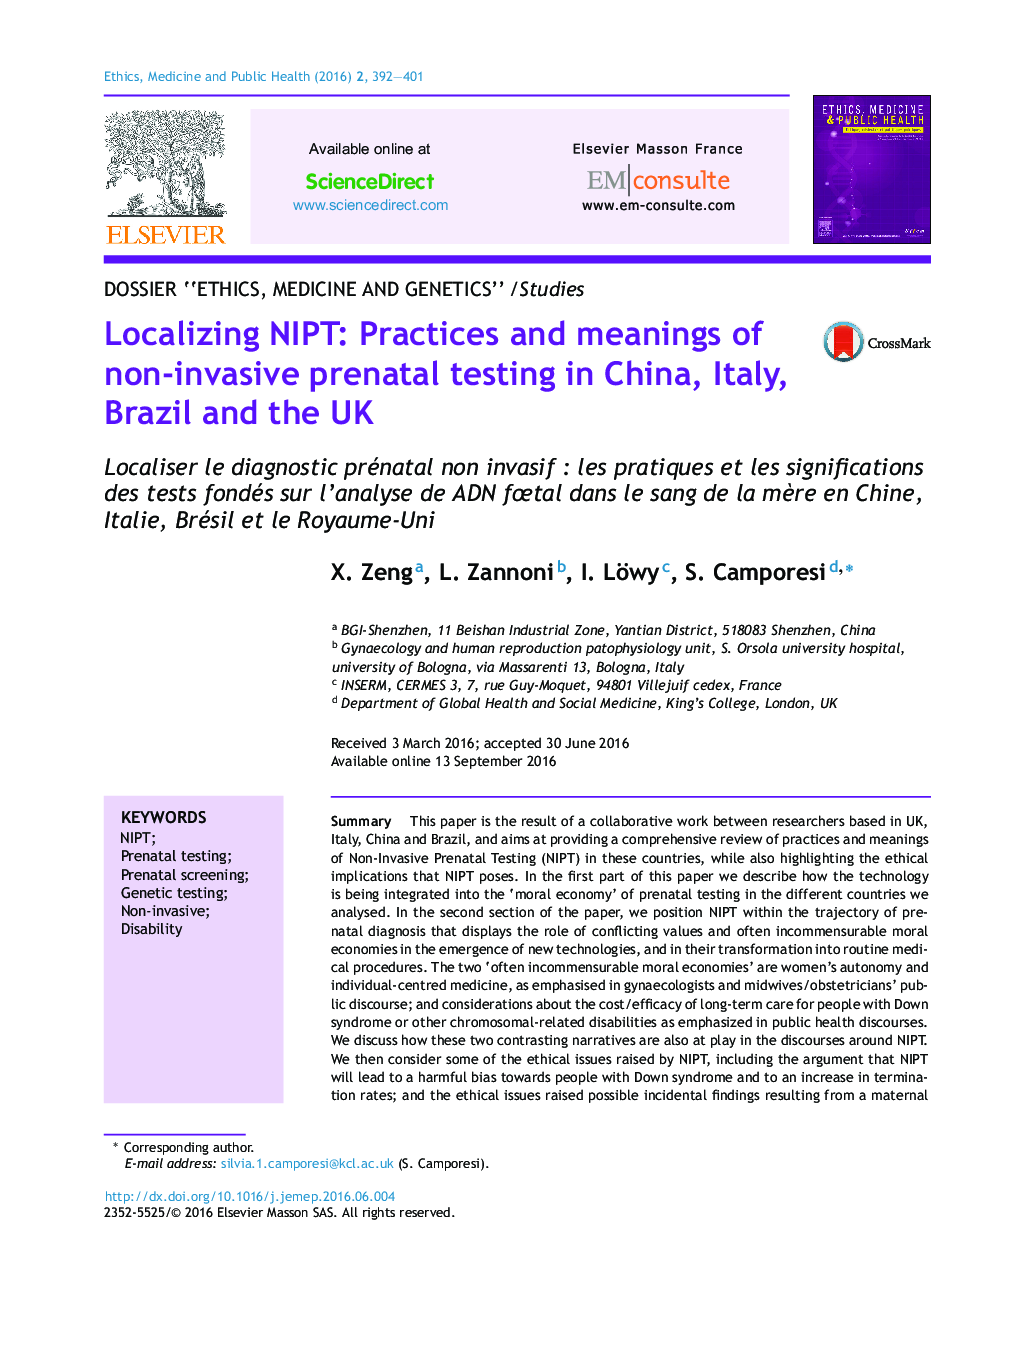 Localizing NIPT: Practices and meanings of non-invasive prenatal testing in China, Italy, Brazil and the UK